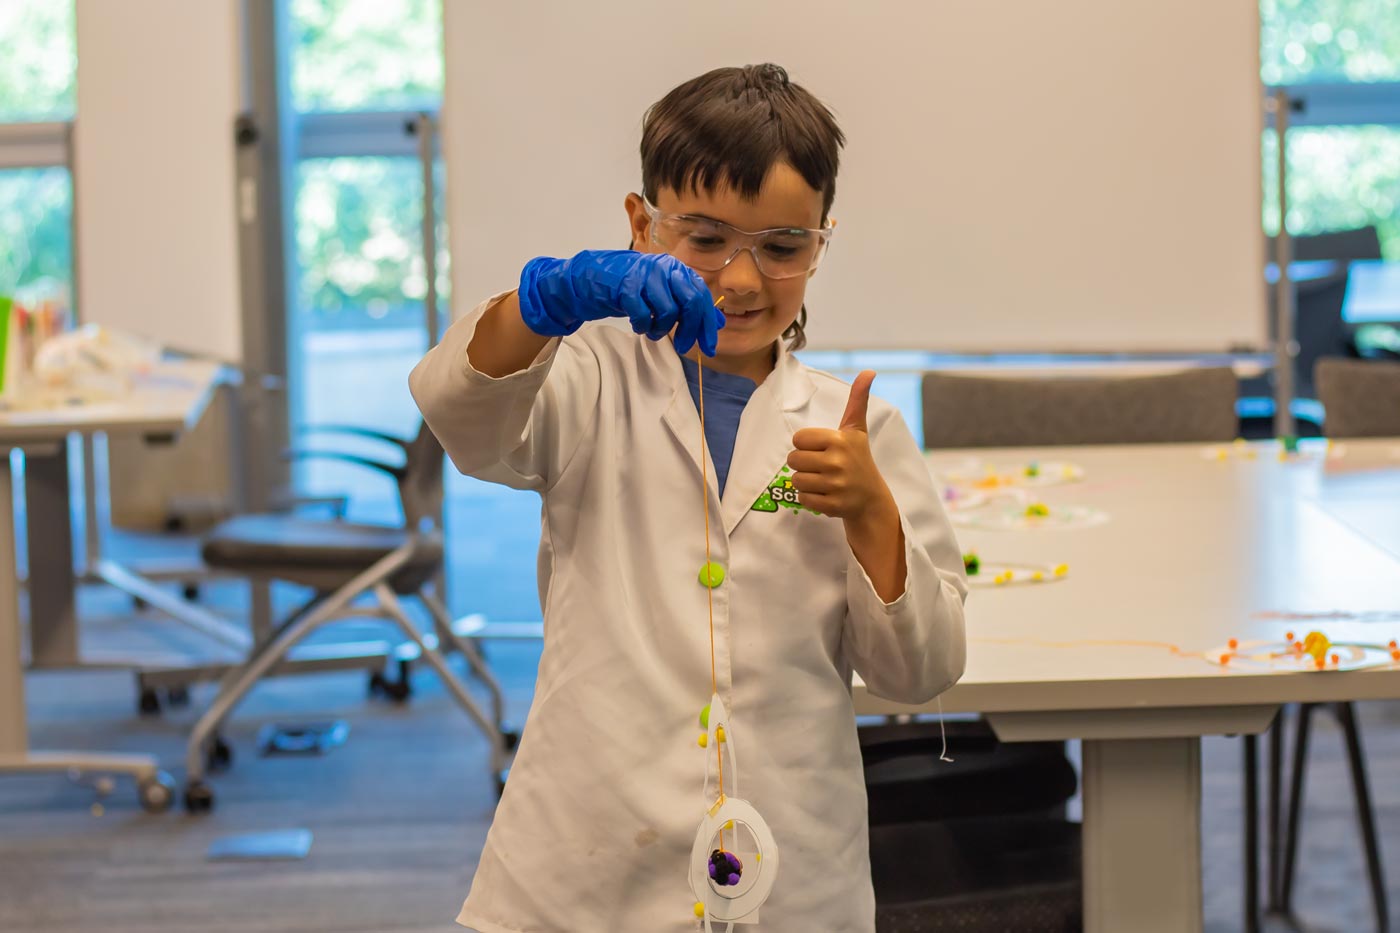 Child holding up a representation of an atom